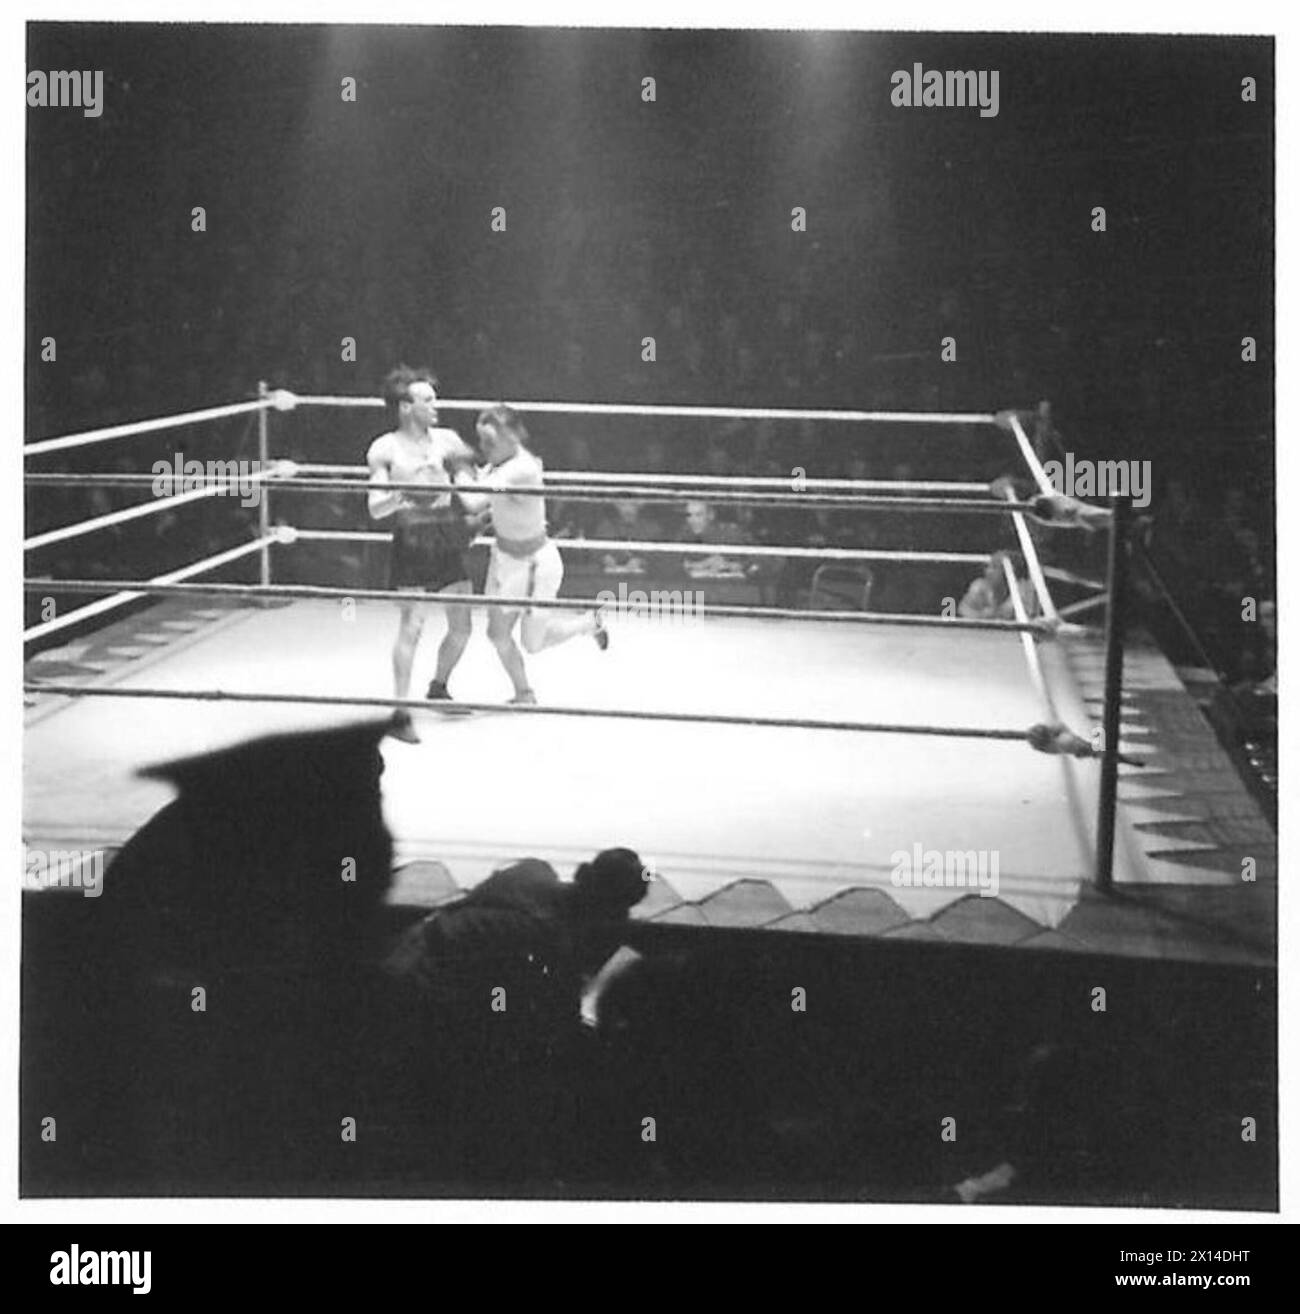 ARMY BOXING CHAMPIONSHIPS - Scenes during the bout between Private Bonser [R.A.] v. Rfn. G. Albrow [R.B.] Rfm. G. Albrow, wearing black shorts, won. [Professional Bantam weight final] British Army Stock Photo